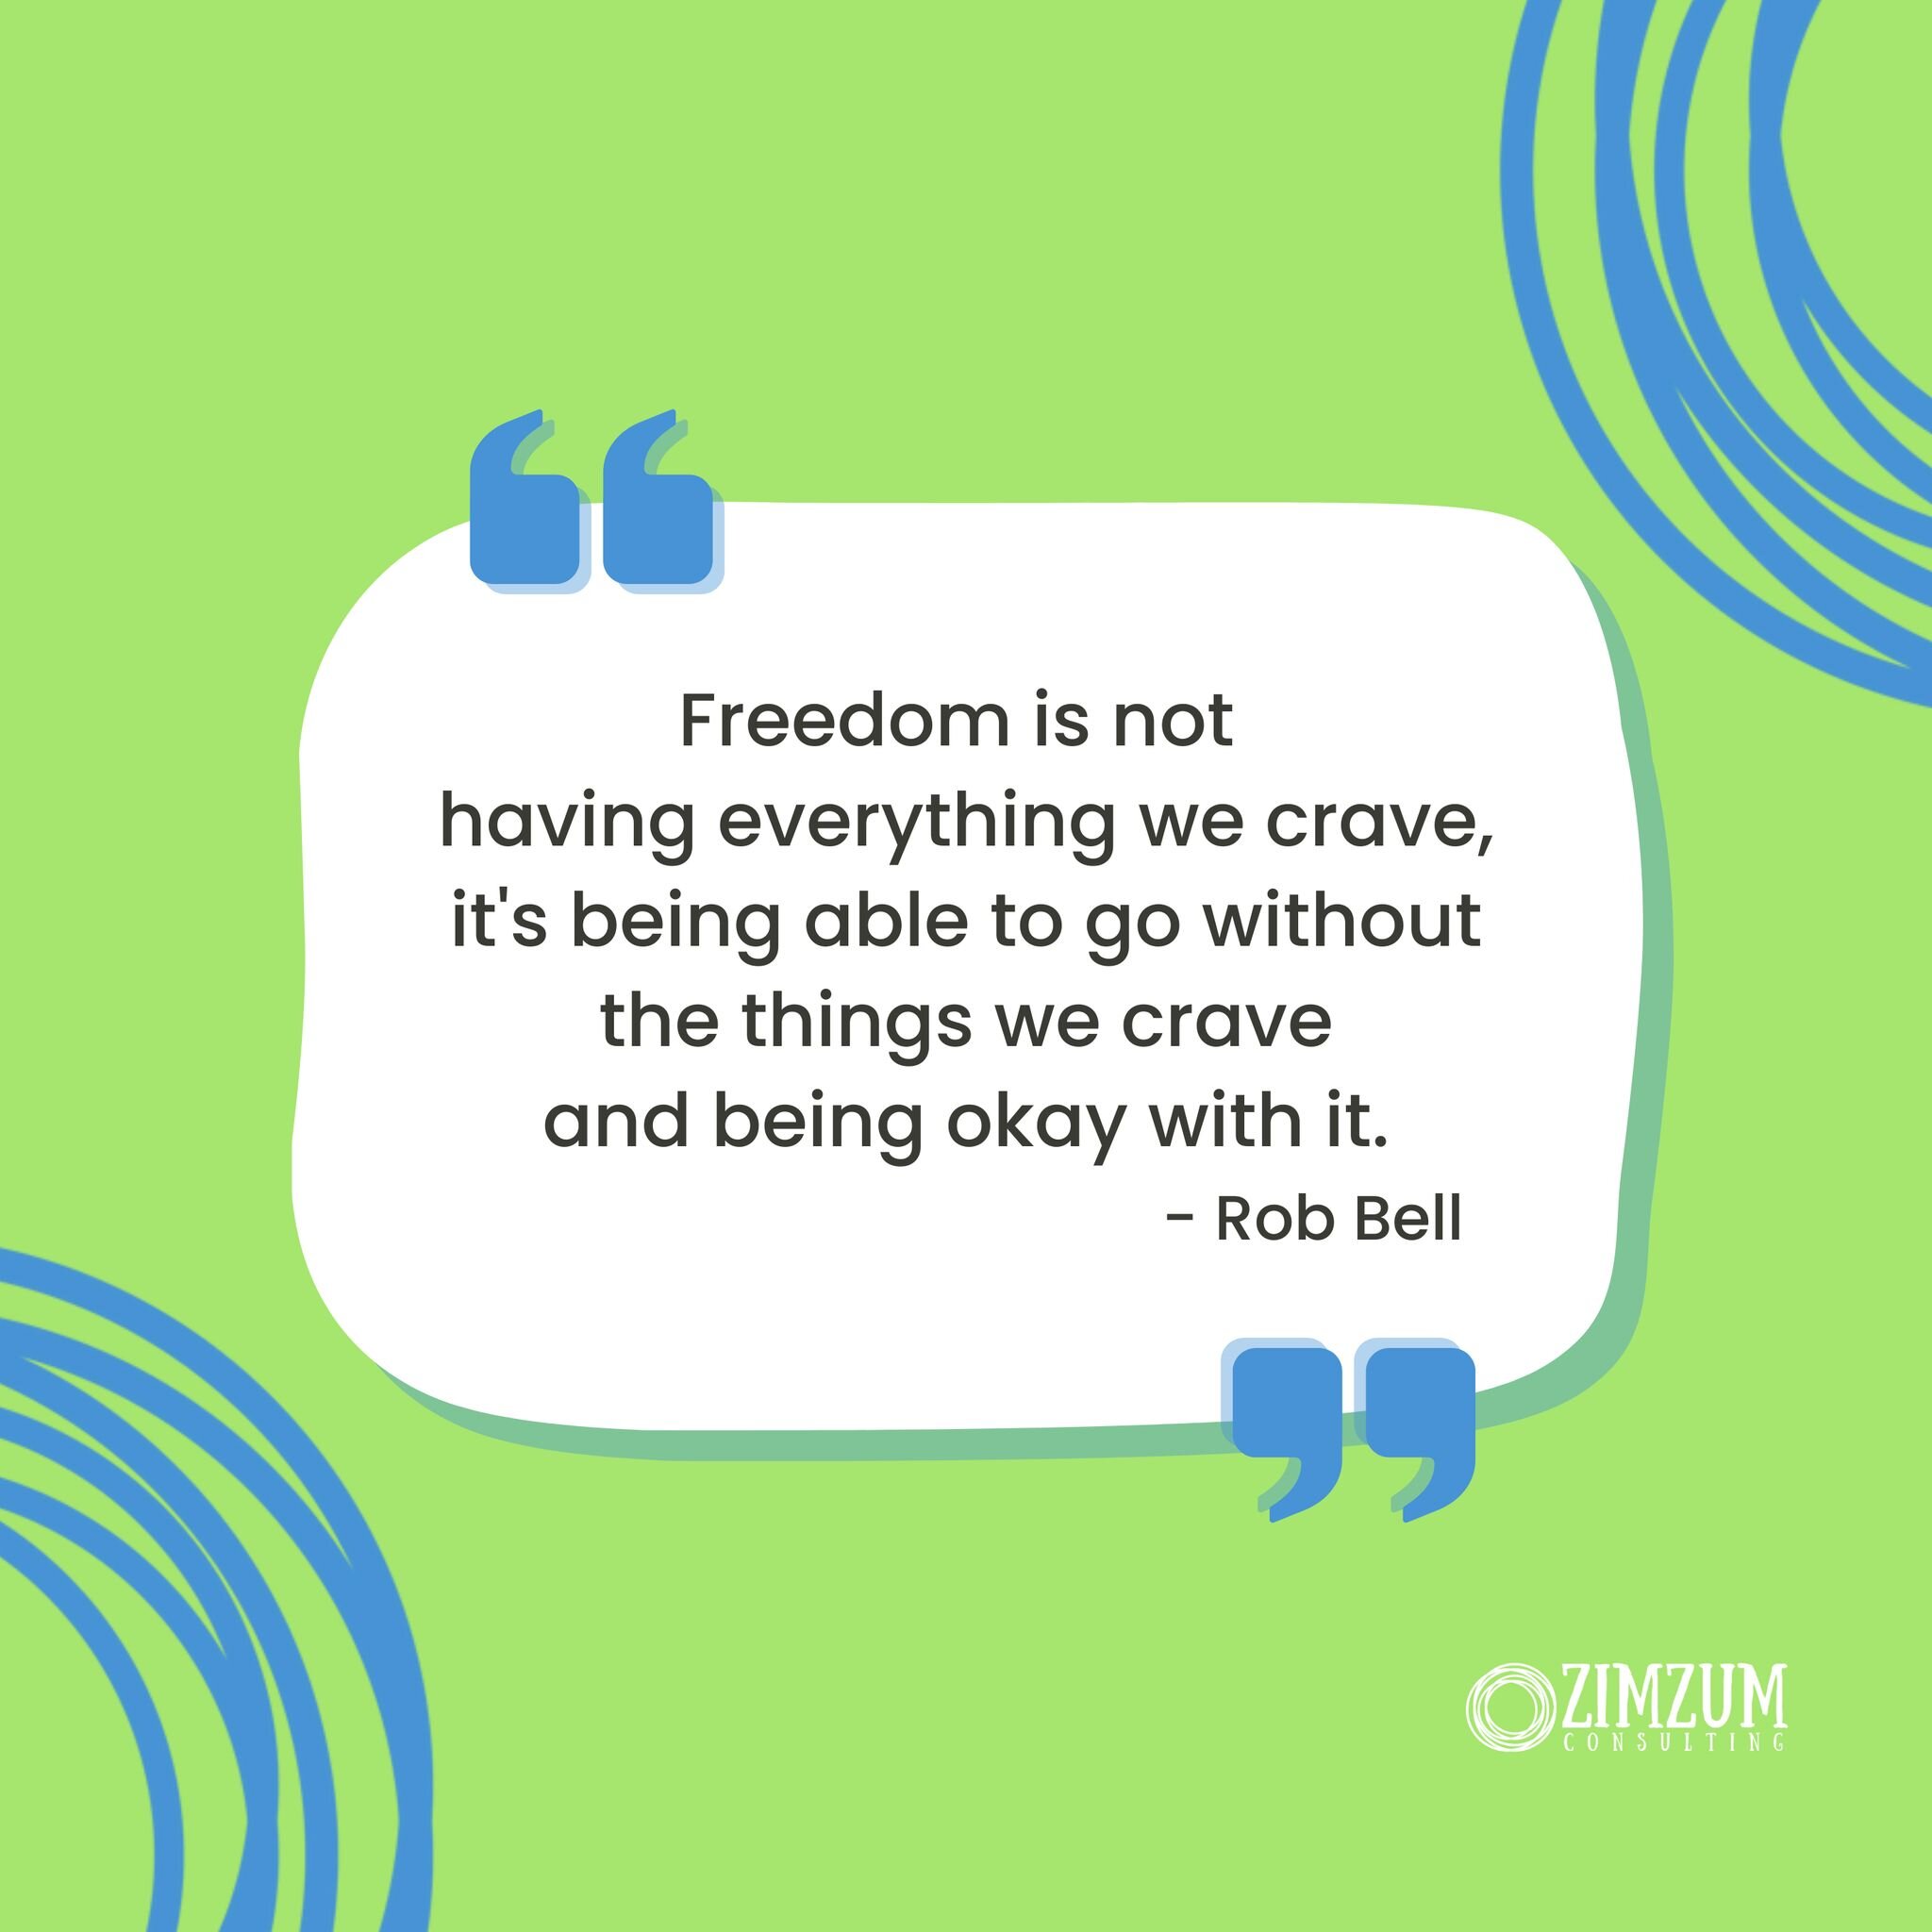 Like and share this post if you agree. 🫶
✨
#robbell #therobcast #therealrobbell #realrobbell #youareloved #youareworthy #youmatter #louisehays #hayhouse #hayhouseradio #podcasts #hayhouseinc #hayhouseauthor #hayhousepublishing #hayhouseuk #instaquot